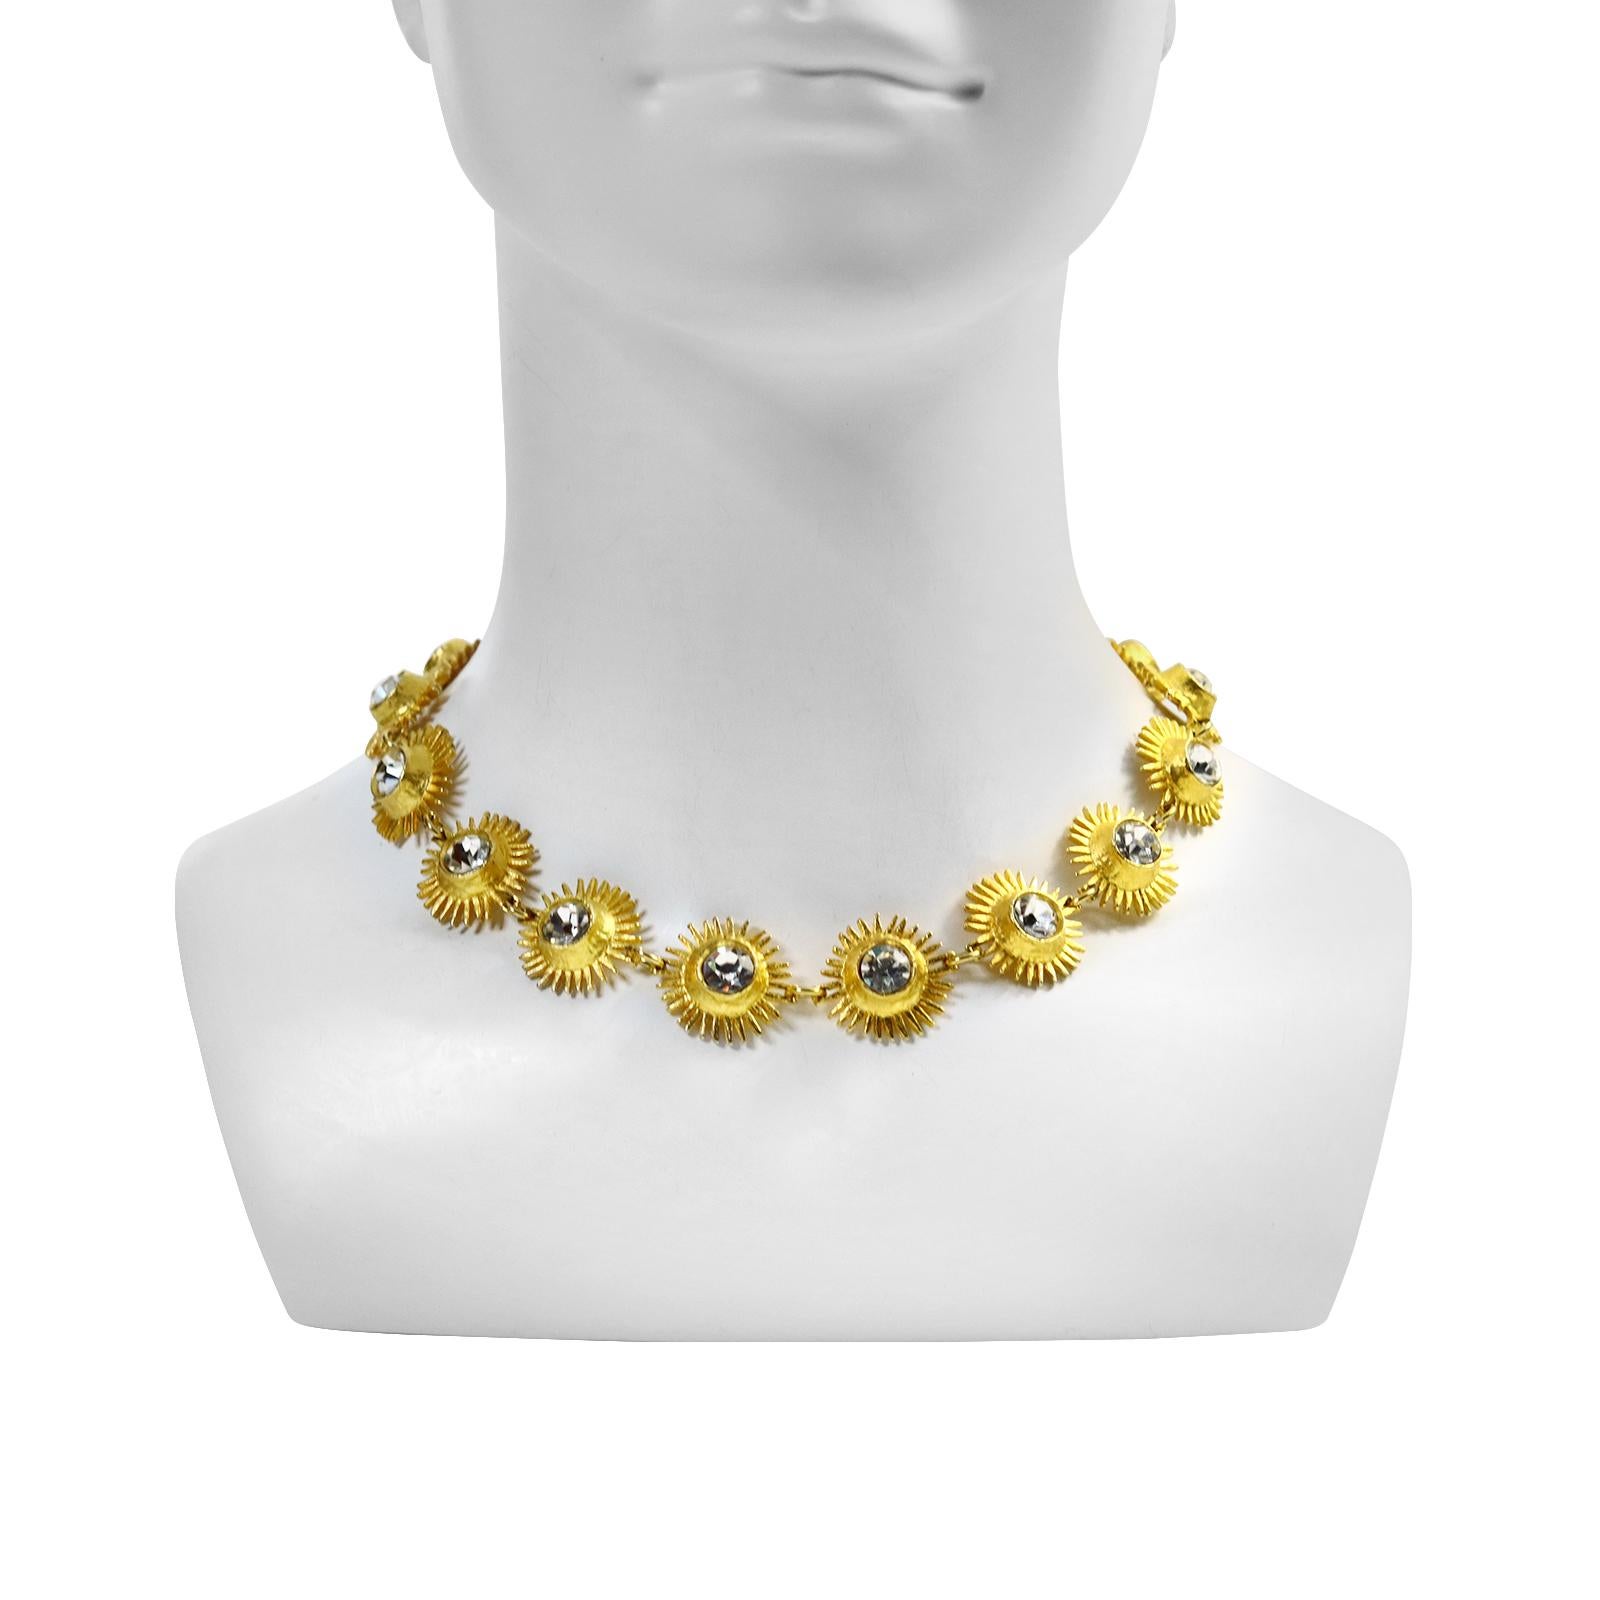 Modern Vintage Edouard Rambaud Gold Necklace with Crystals Circa 1980s For Sale